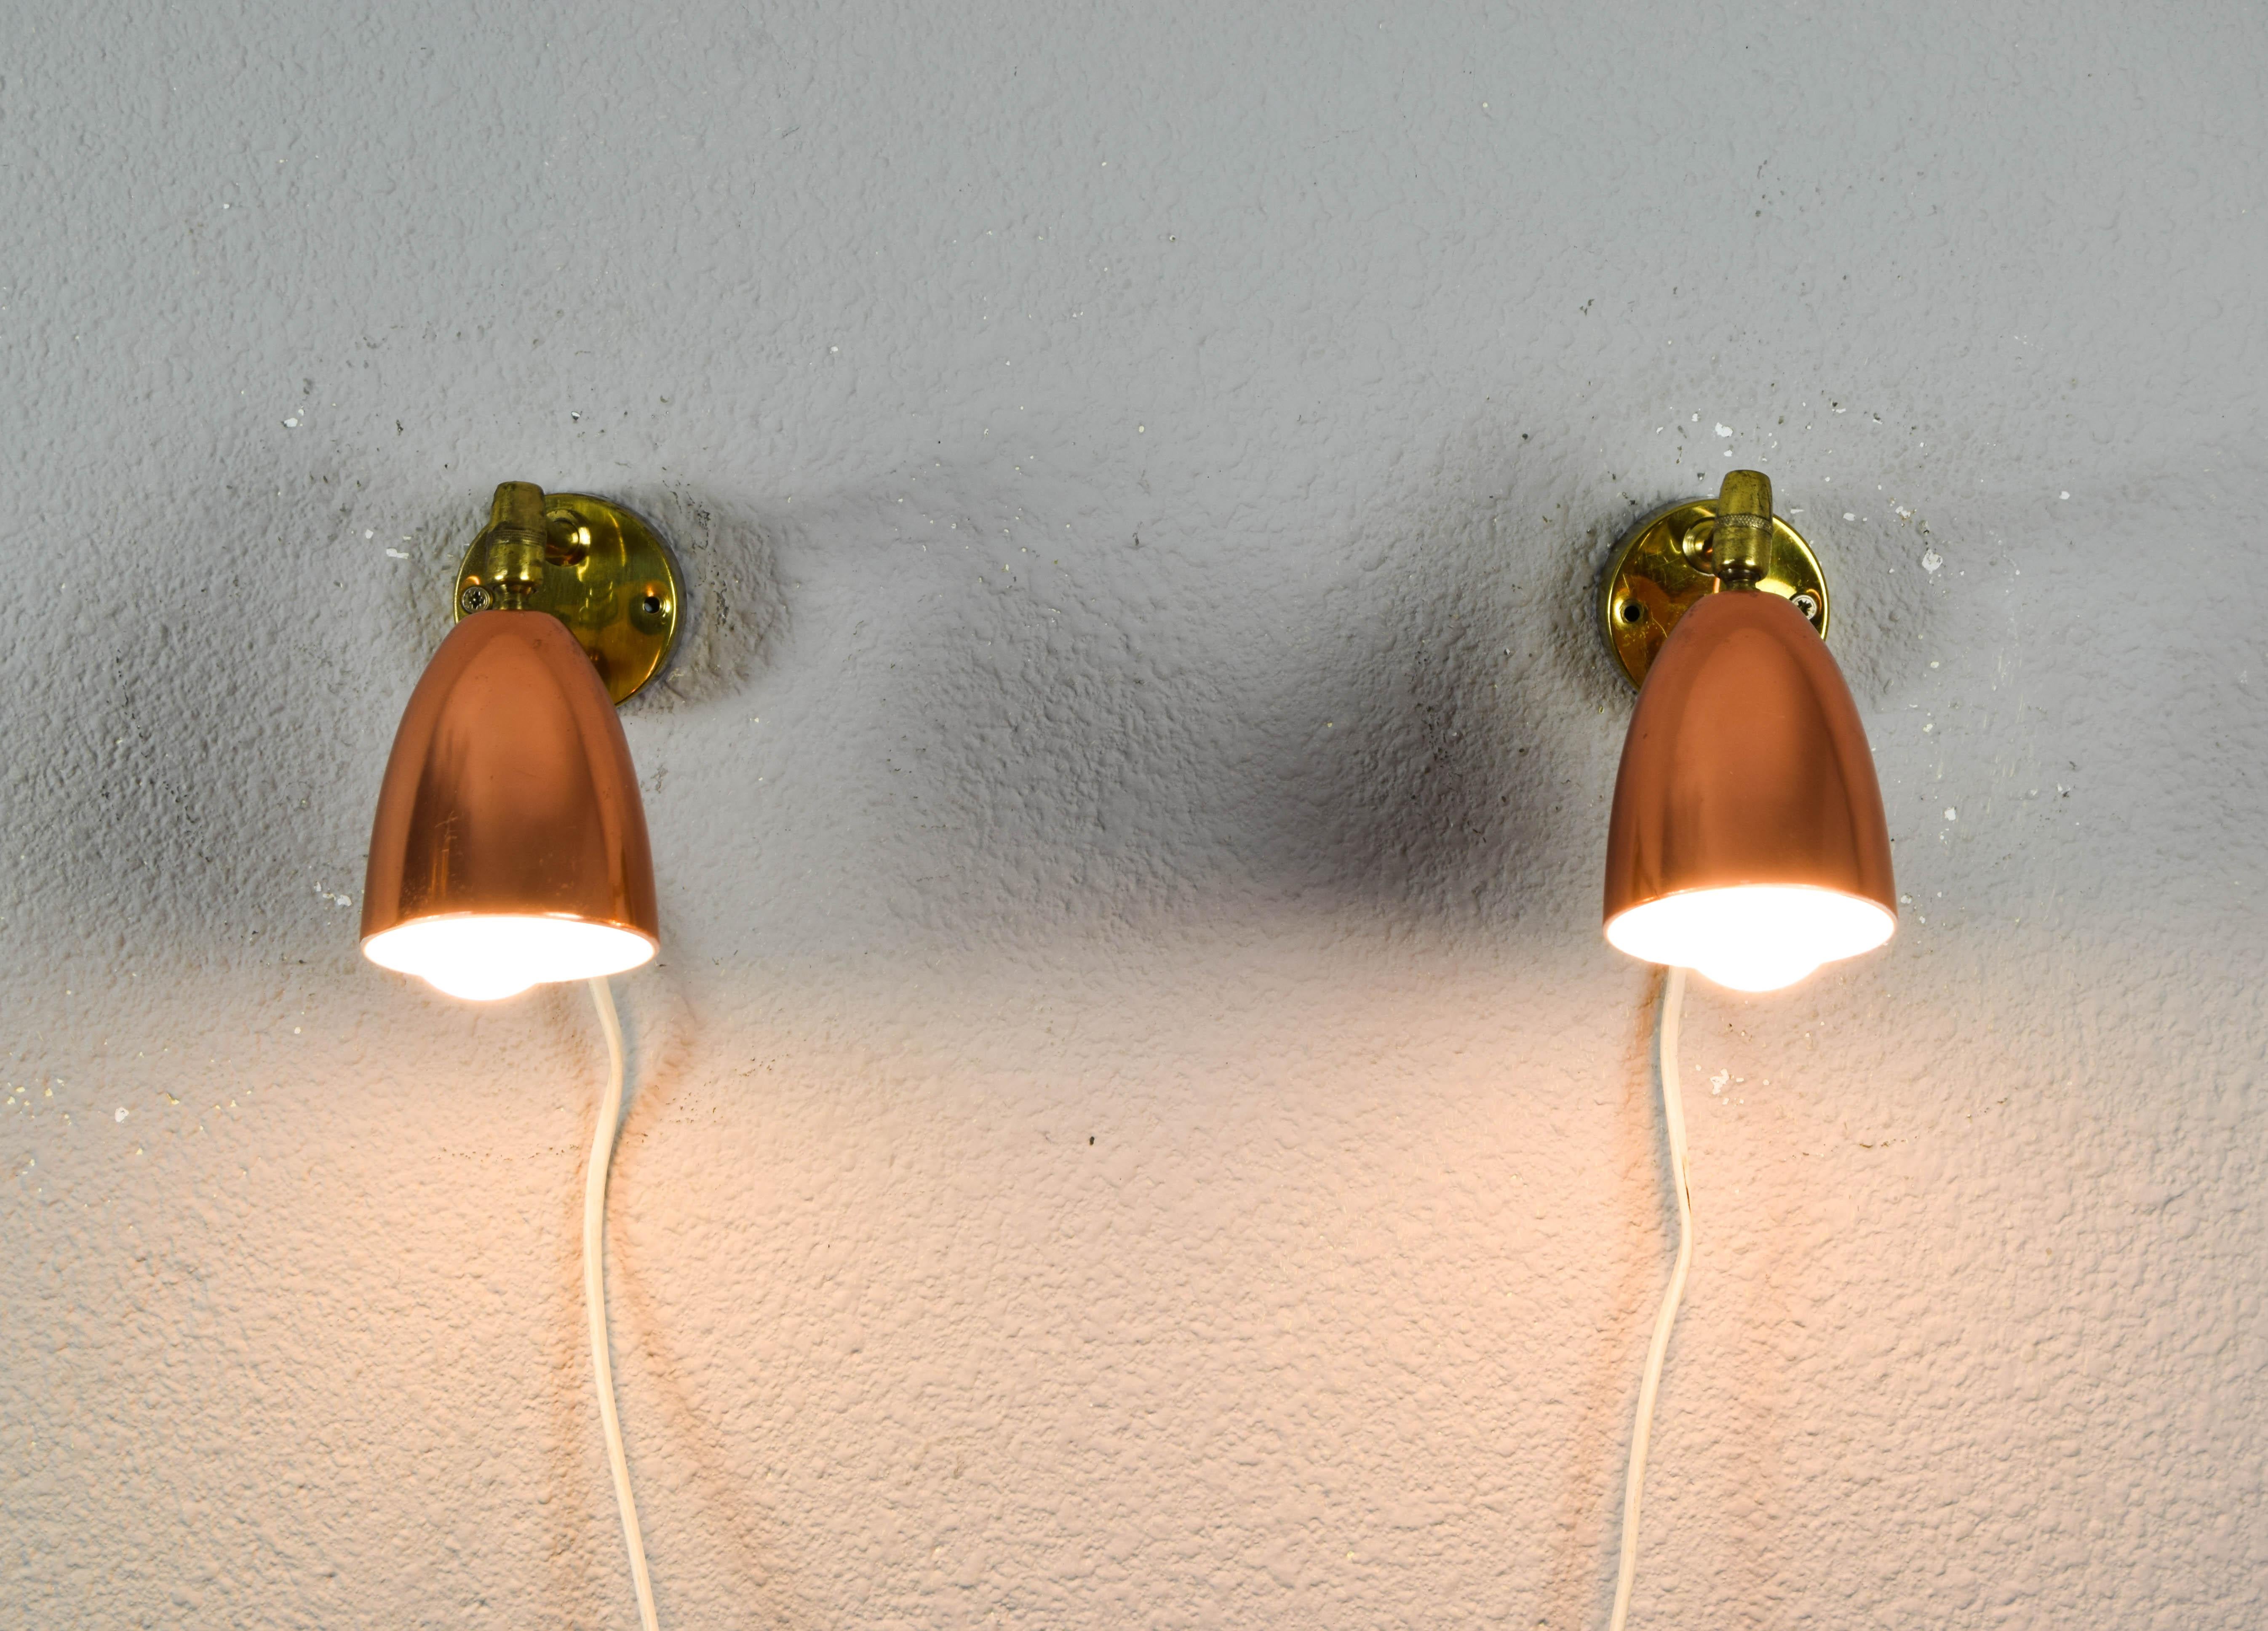 Pair of Jacques Biny style brass and copper wall lights from the 1960s. A refined and simple yet elegant design made of copper and brass with a white painted interior lampshade. Essentially French modernist in its conception and execution. The